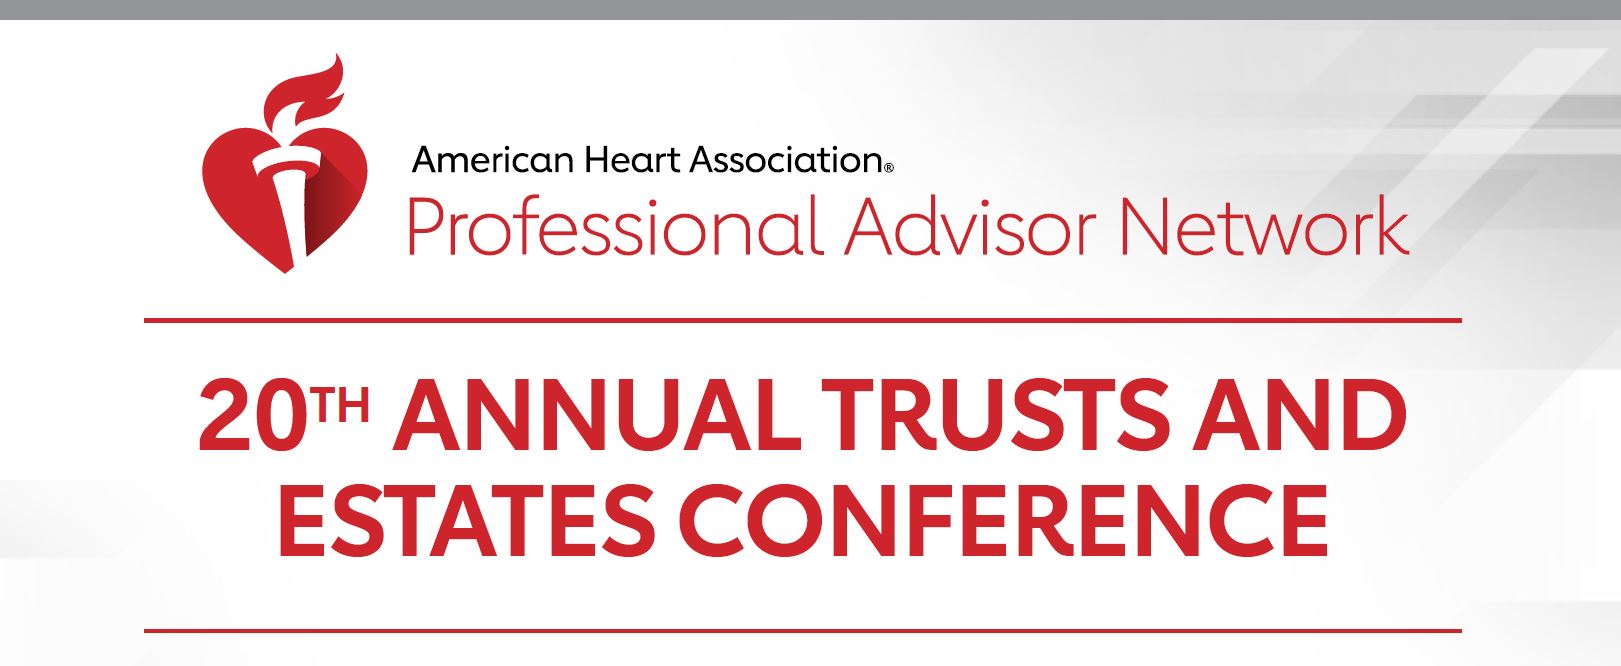 AHA Professioal Advisor Network - 20th Annual Trusts and Estates Conference